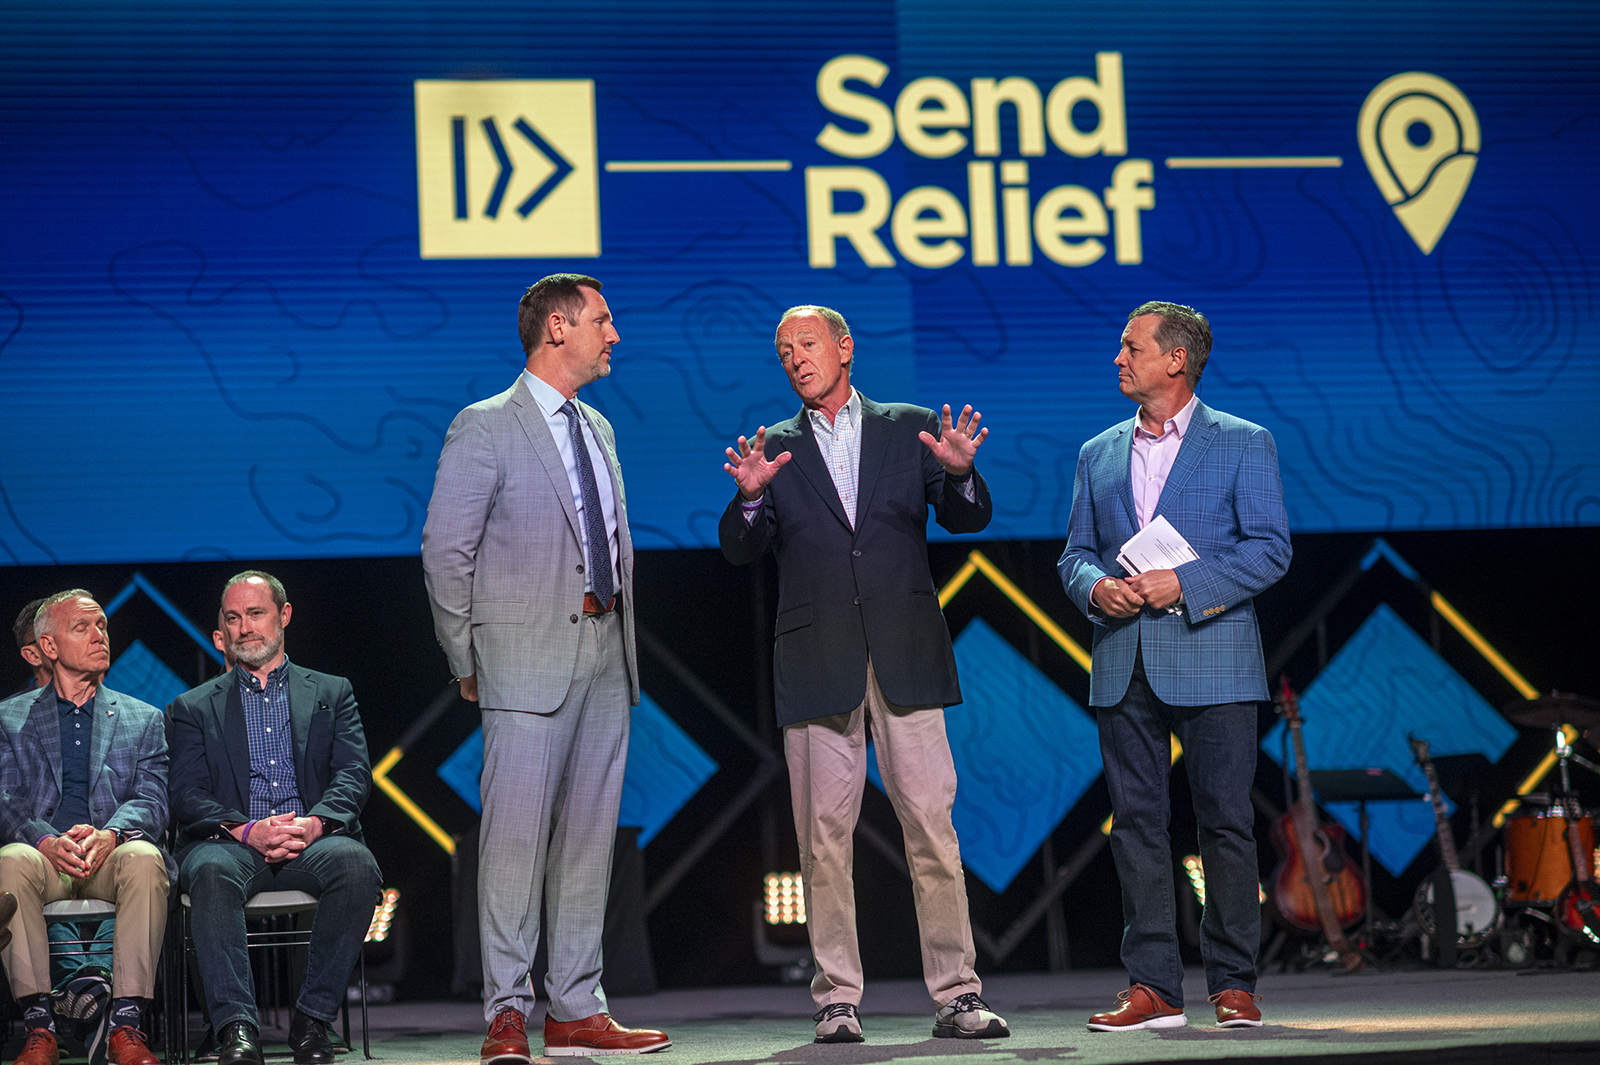 Paul Chitwood, from left, president of the International Mission Board, Bryant Wright, president of Send Relief, and Kevin Ezell, president of the North American Mission Board, at the Southern Baptist Convention annual meeting at the Ernst Memorial Convention Center in New Orleans, La., on June 13, 2023. RNS photo by Emily Kask